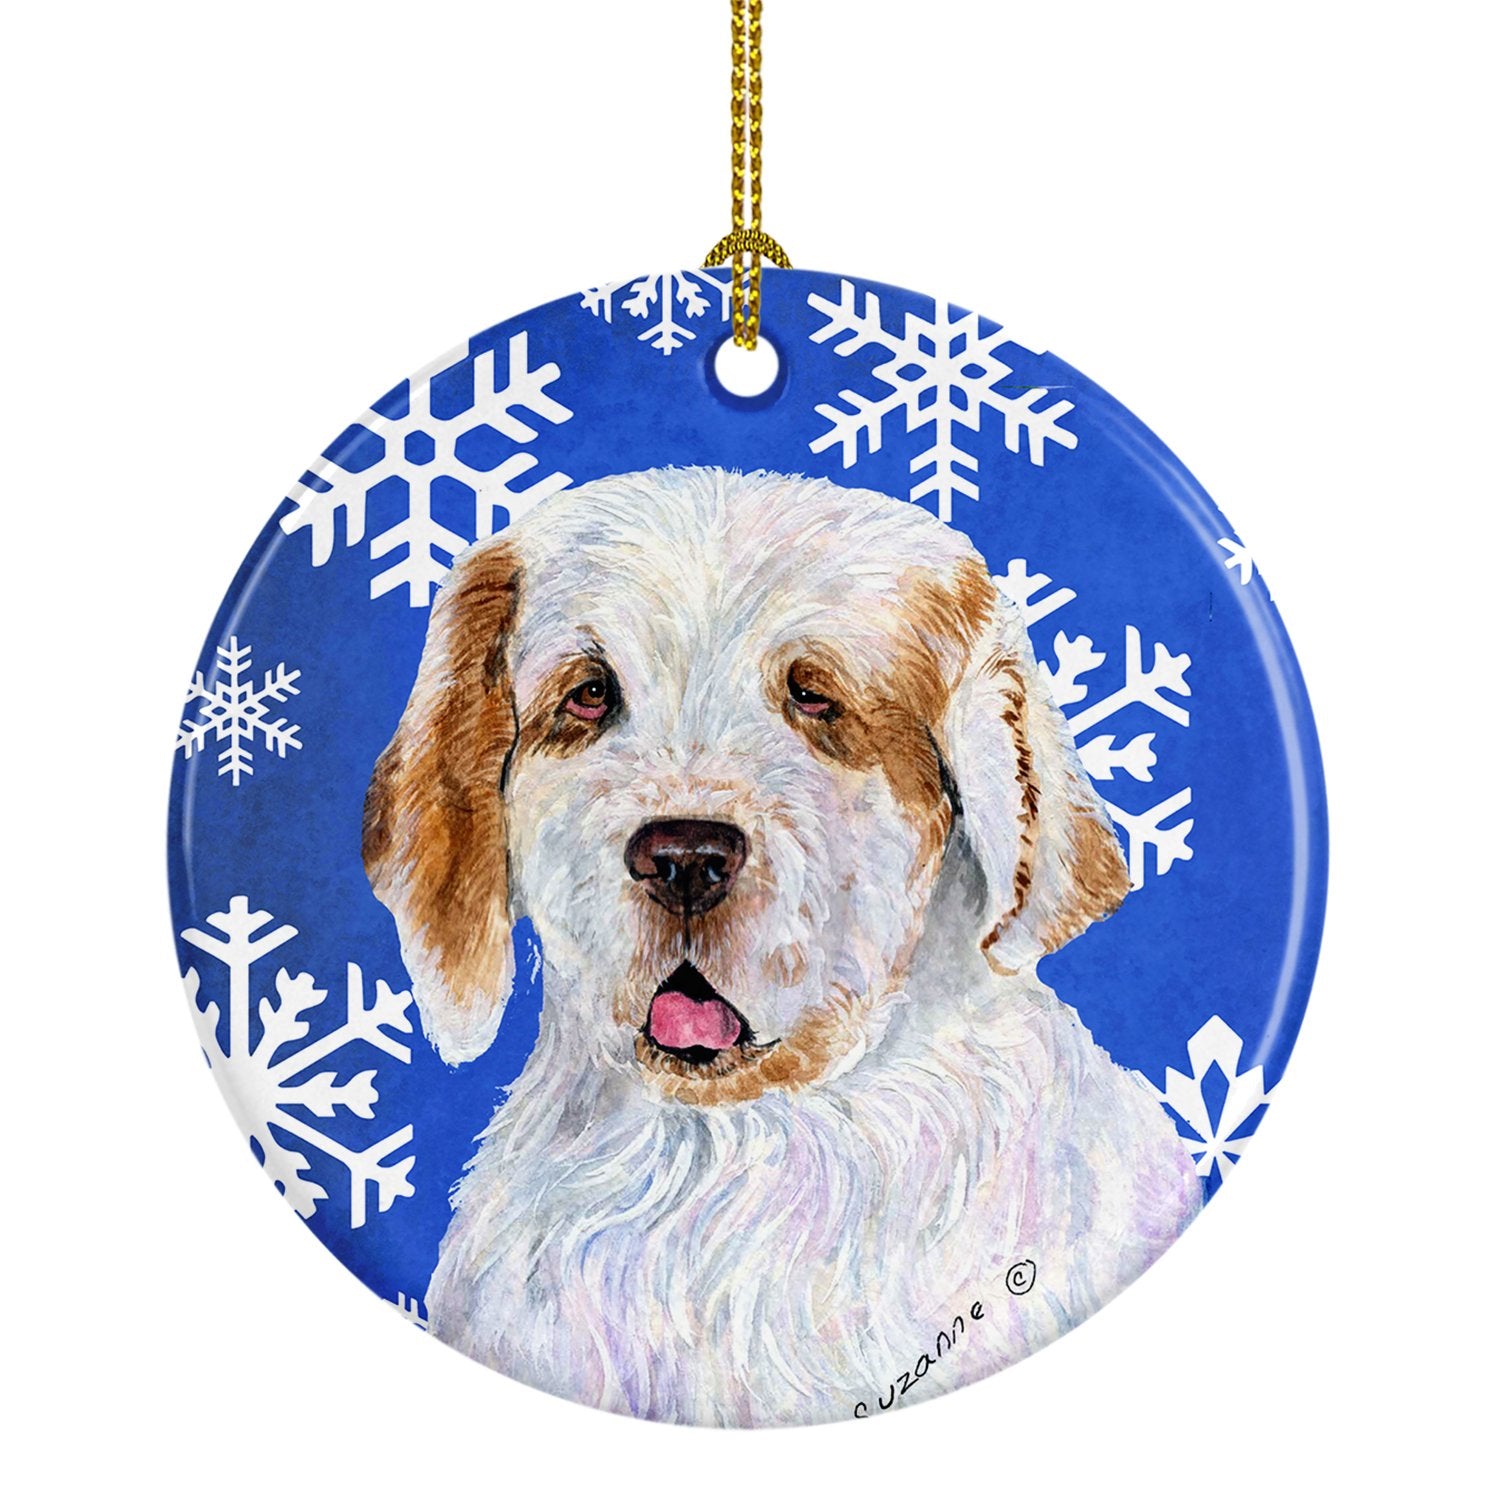 Clumber Spaniel Winter Snowflakes Holiday Christmas Ceramic Ornament SS4638 by Caroline's Treasures